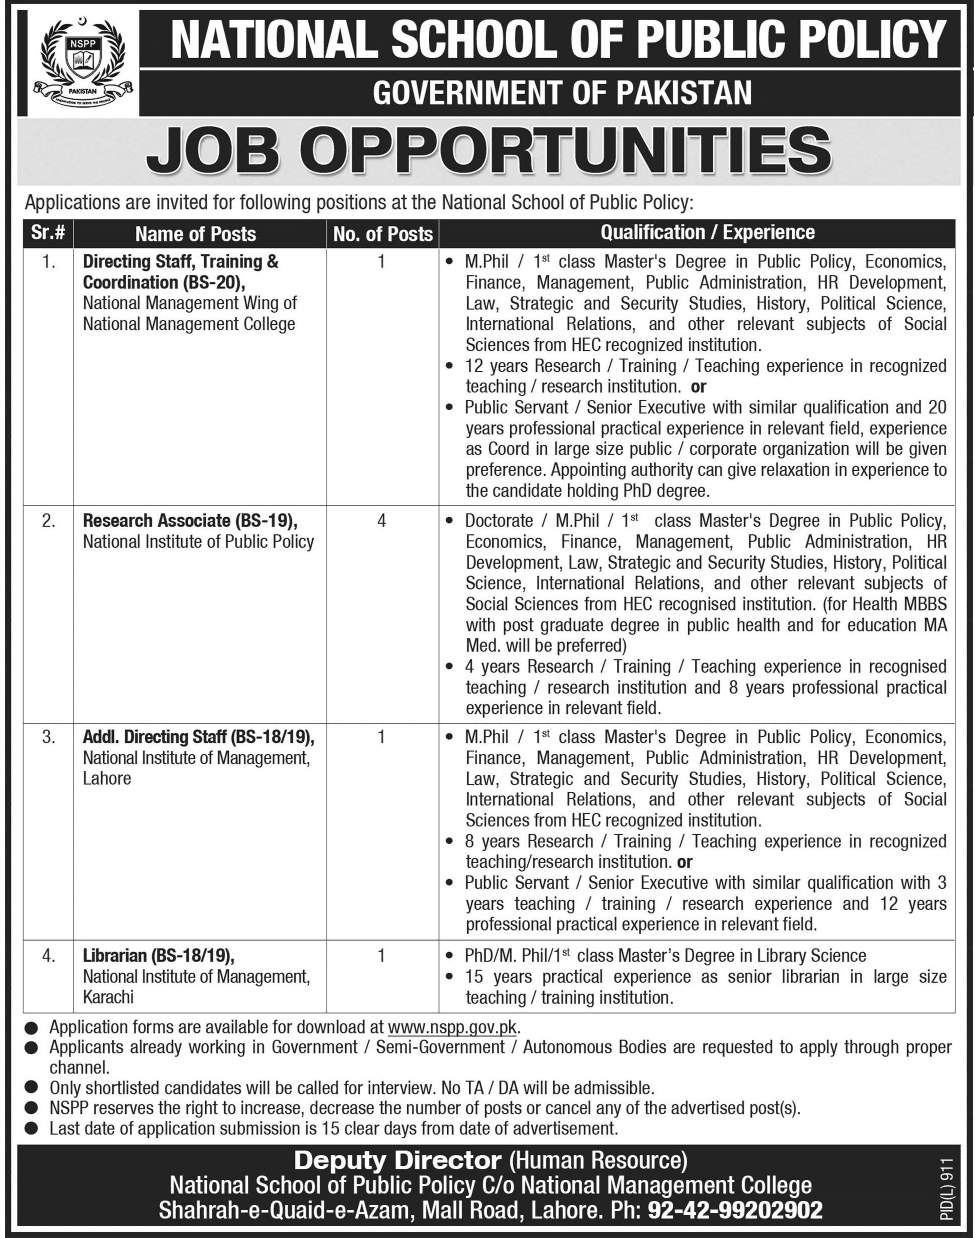 GOVT NATIONAL SCHOOL OF PUBLIC POLICY (NSPP) JOBS 2015.